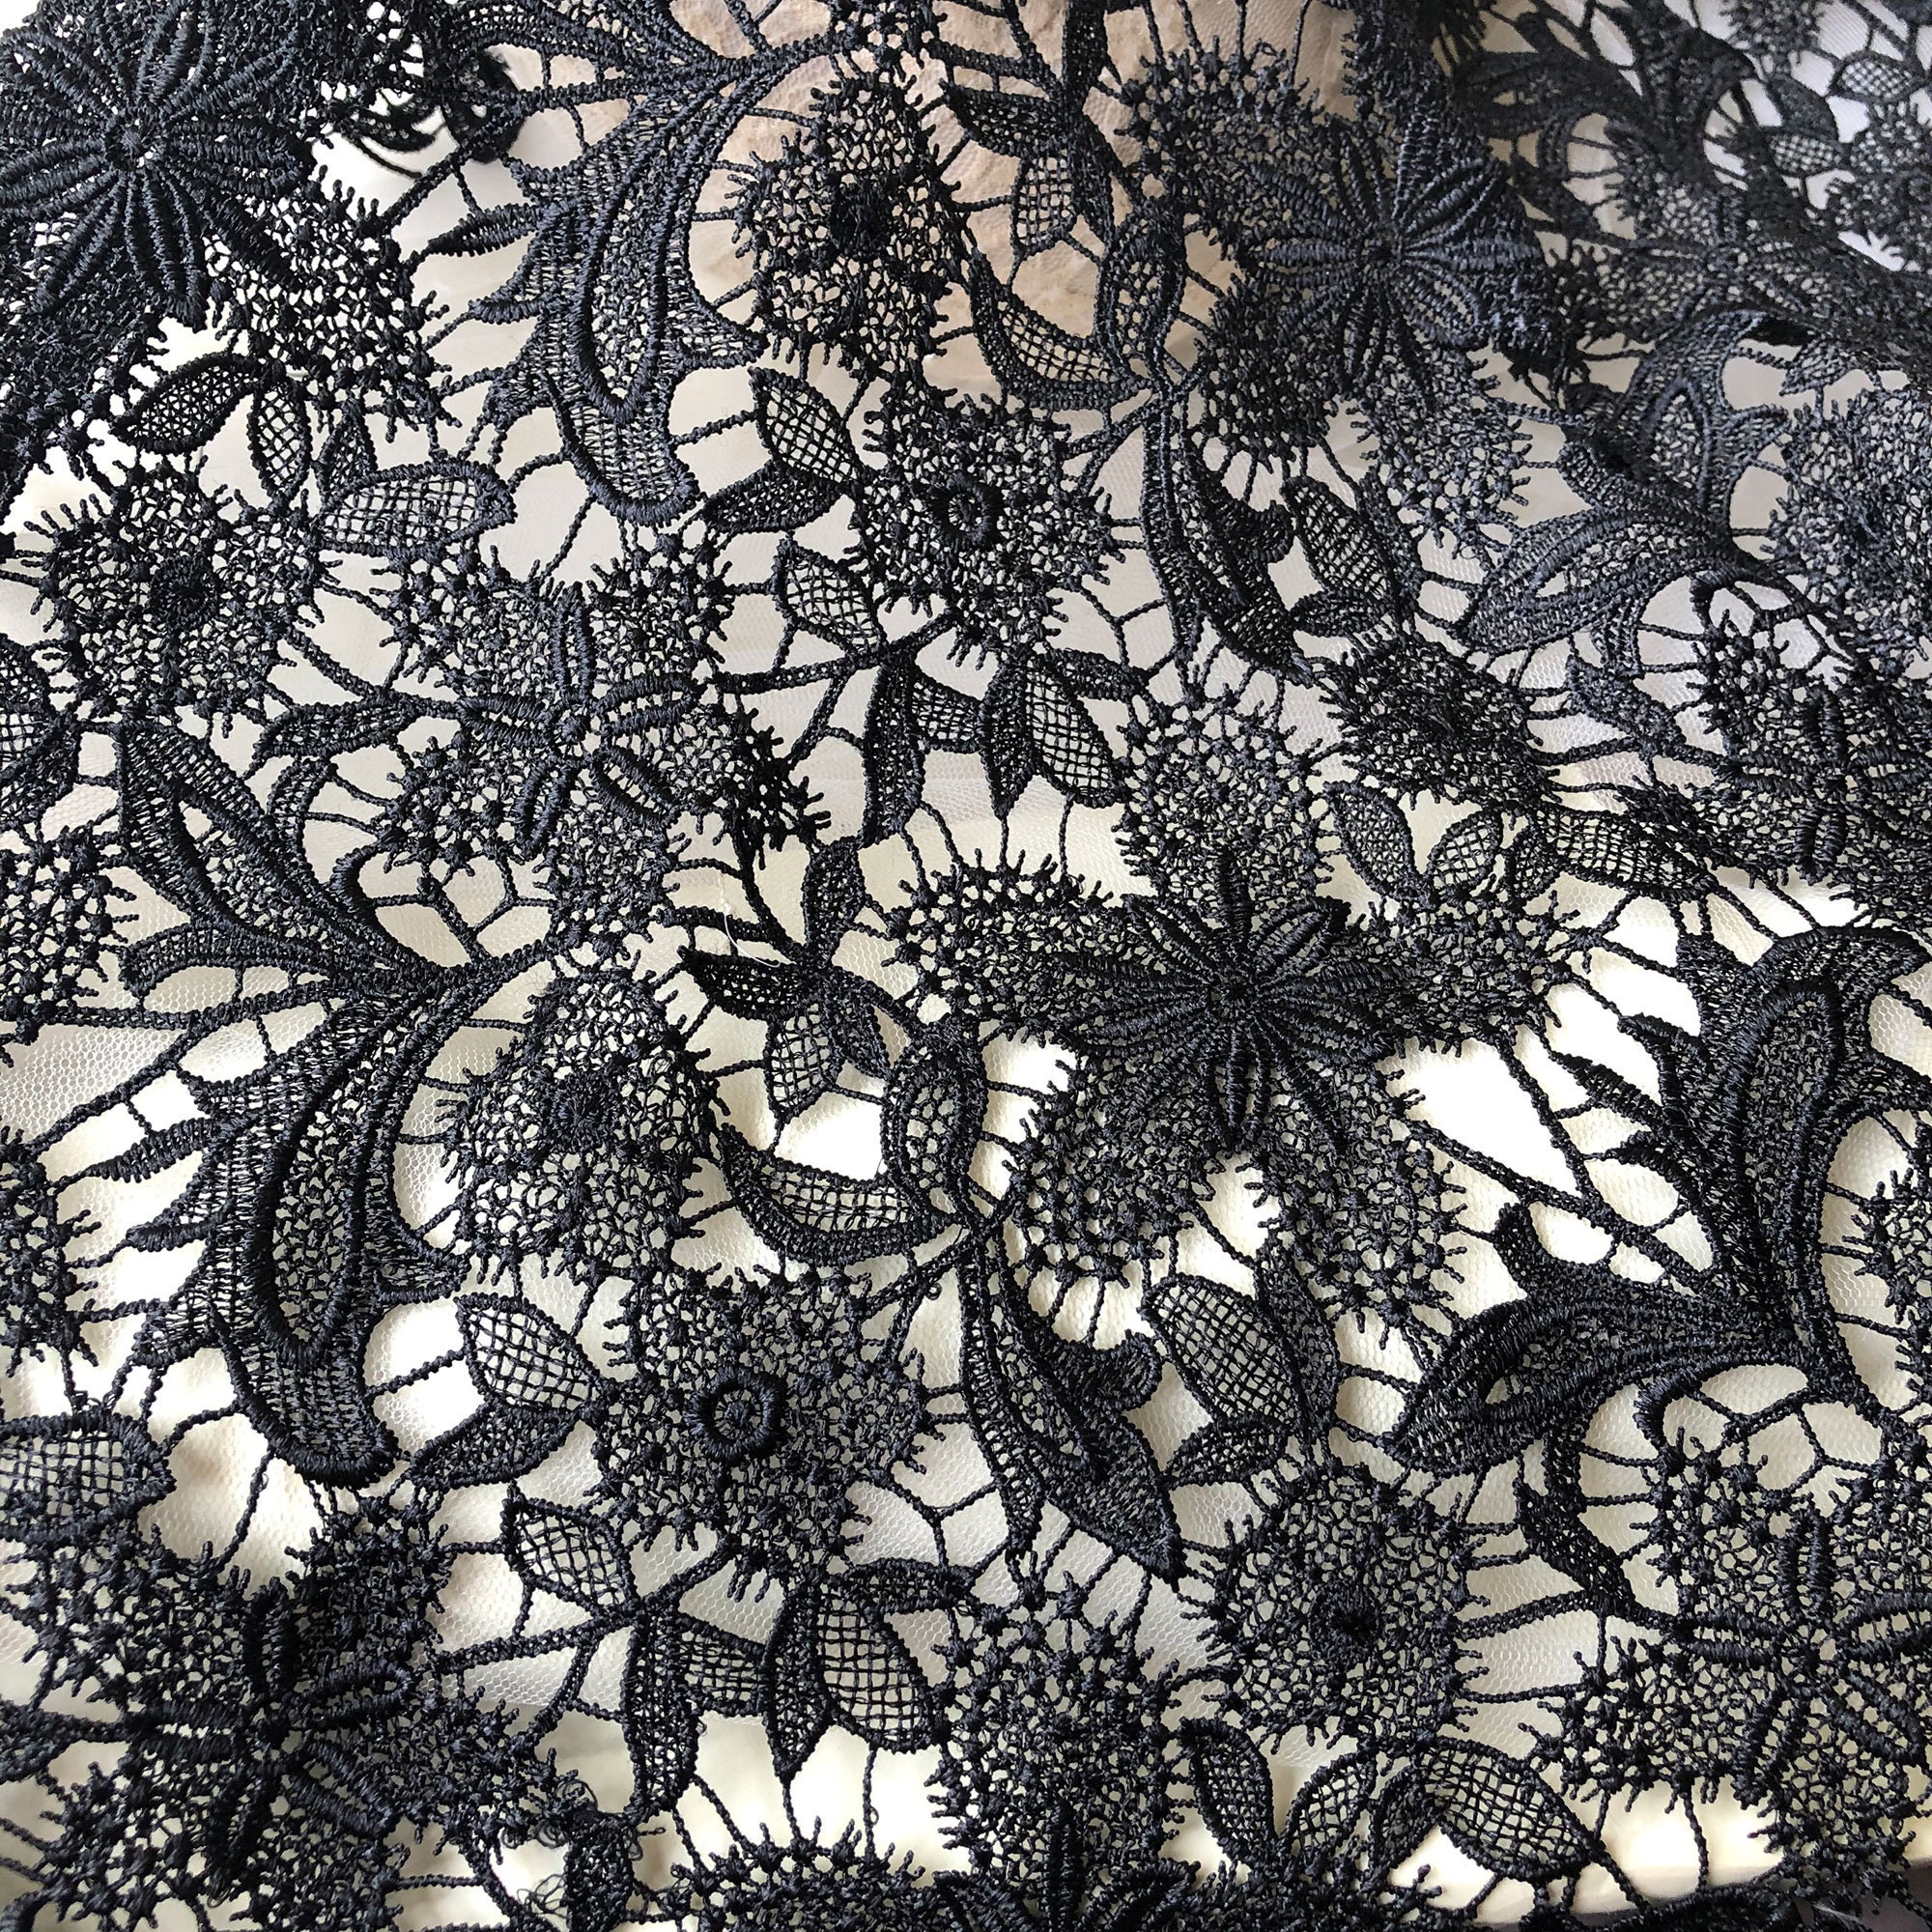 Black Lace Fabric by the Yard Black Flower Lace Mesh Delicate Fabric Tulle  for Evening Ballgown Maxi Dress 